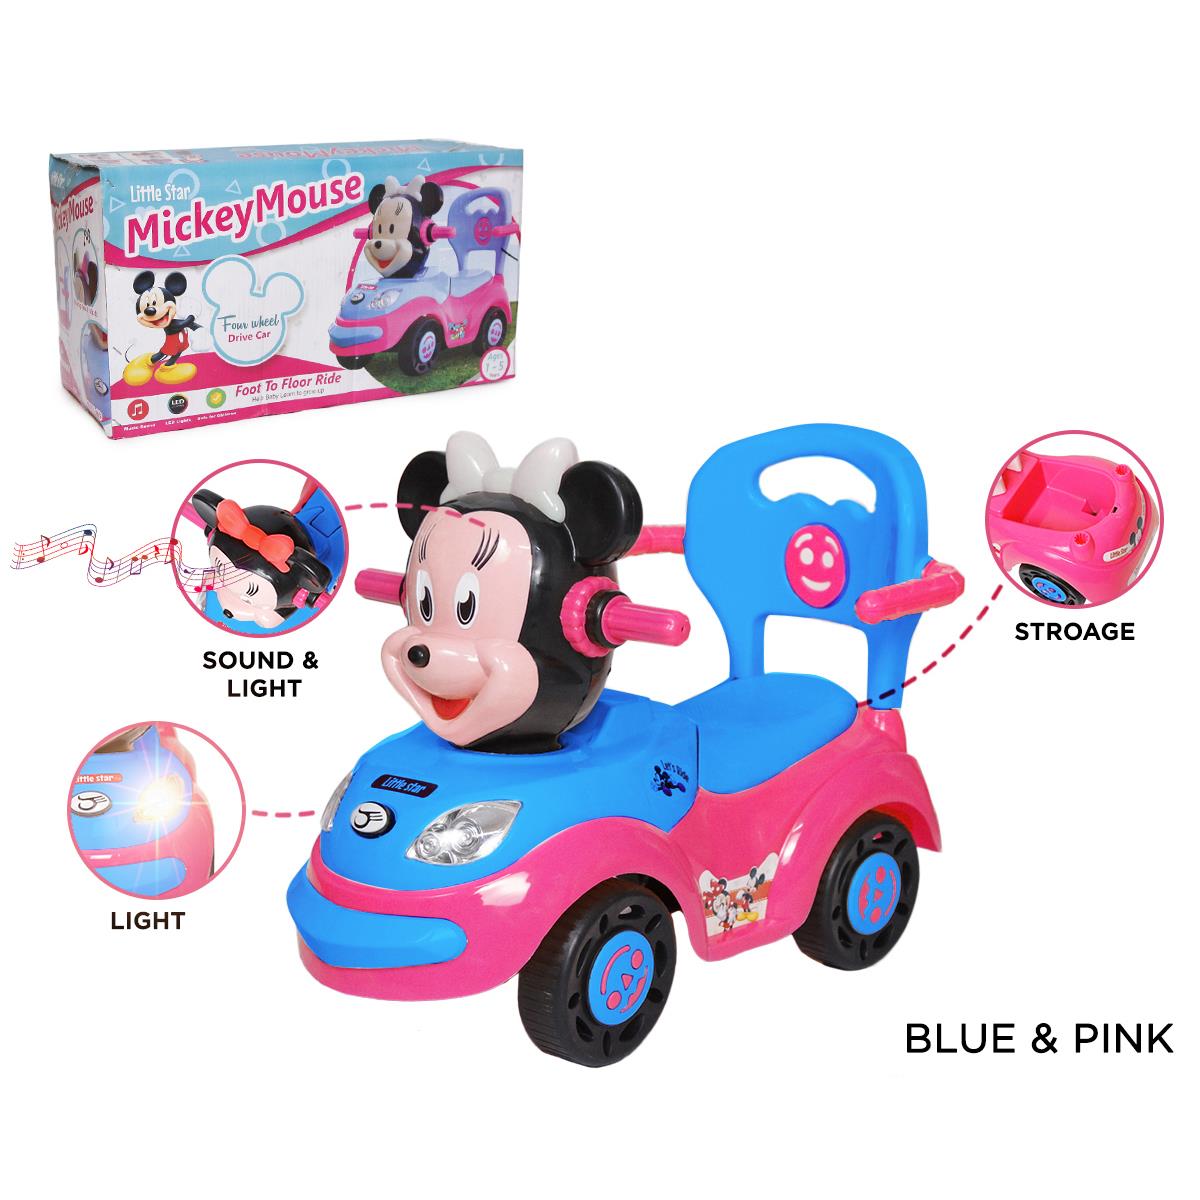 Mickey Mouse Push Car With Lights & Music - Madina Gift